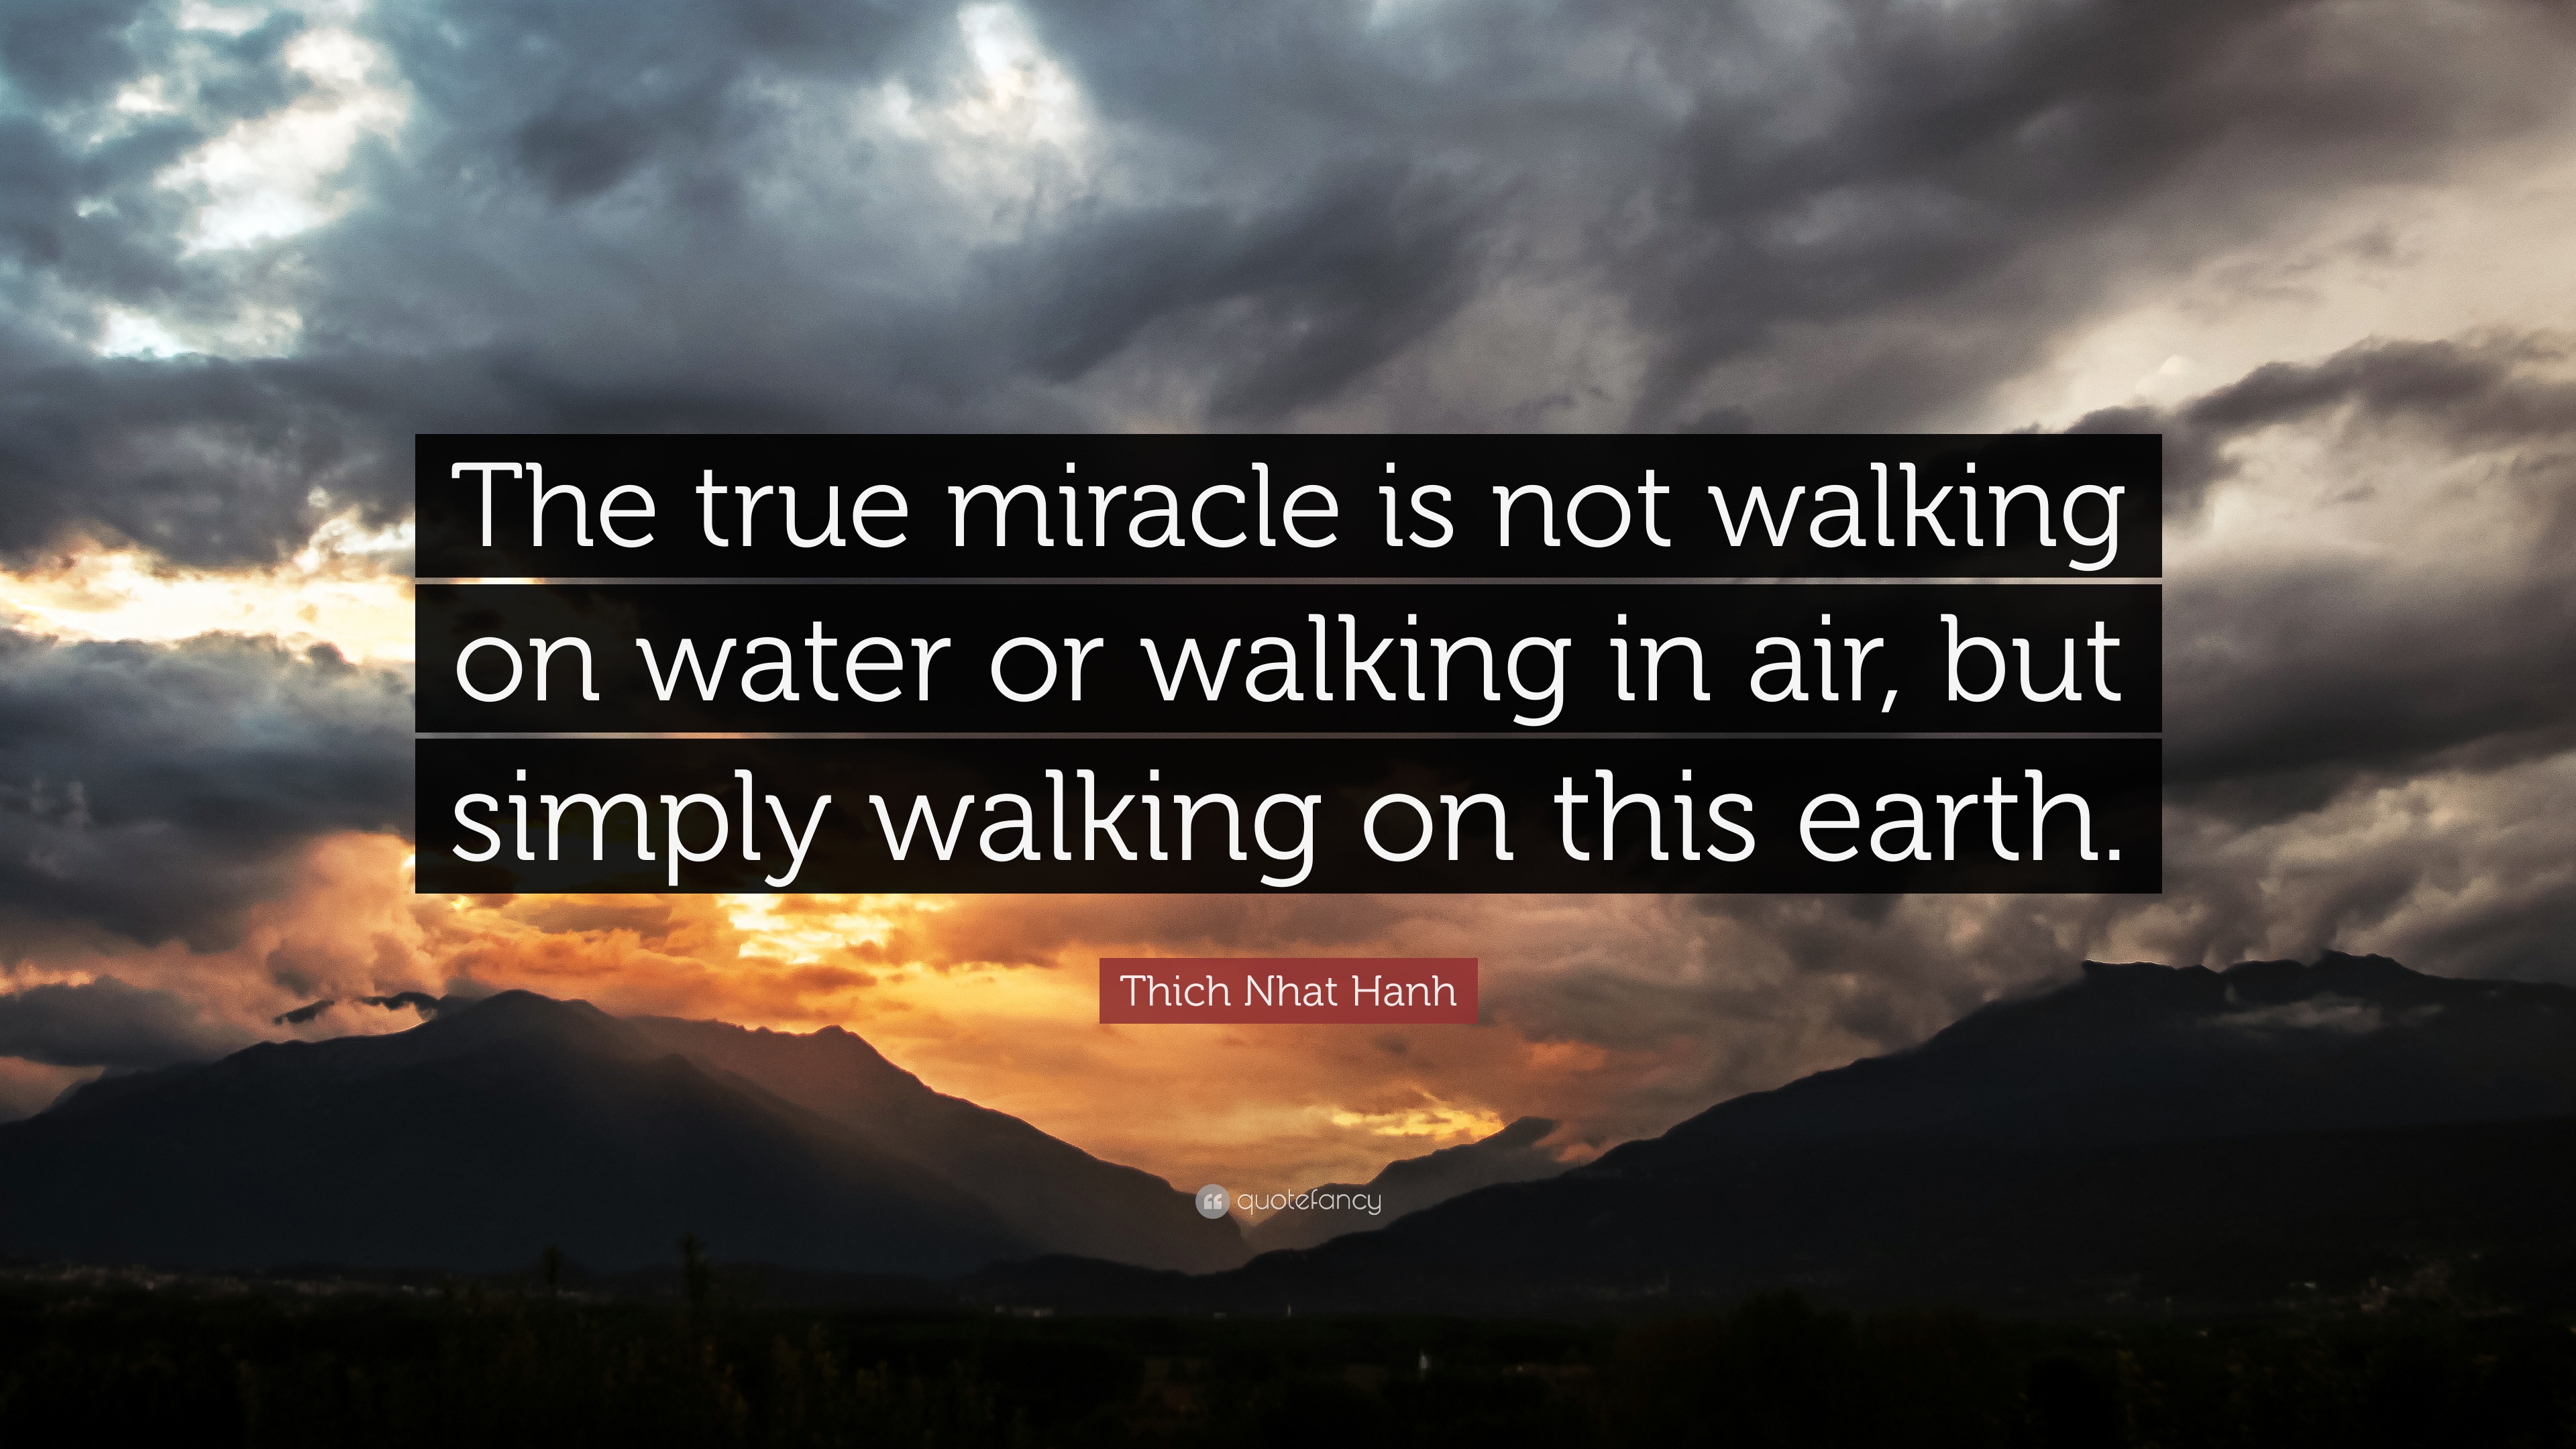 Thich Nhat Hanh Quote “The true miracle is not walking on water or walking